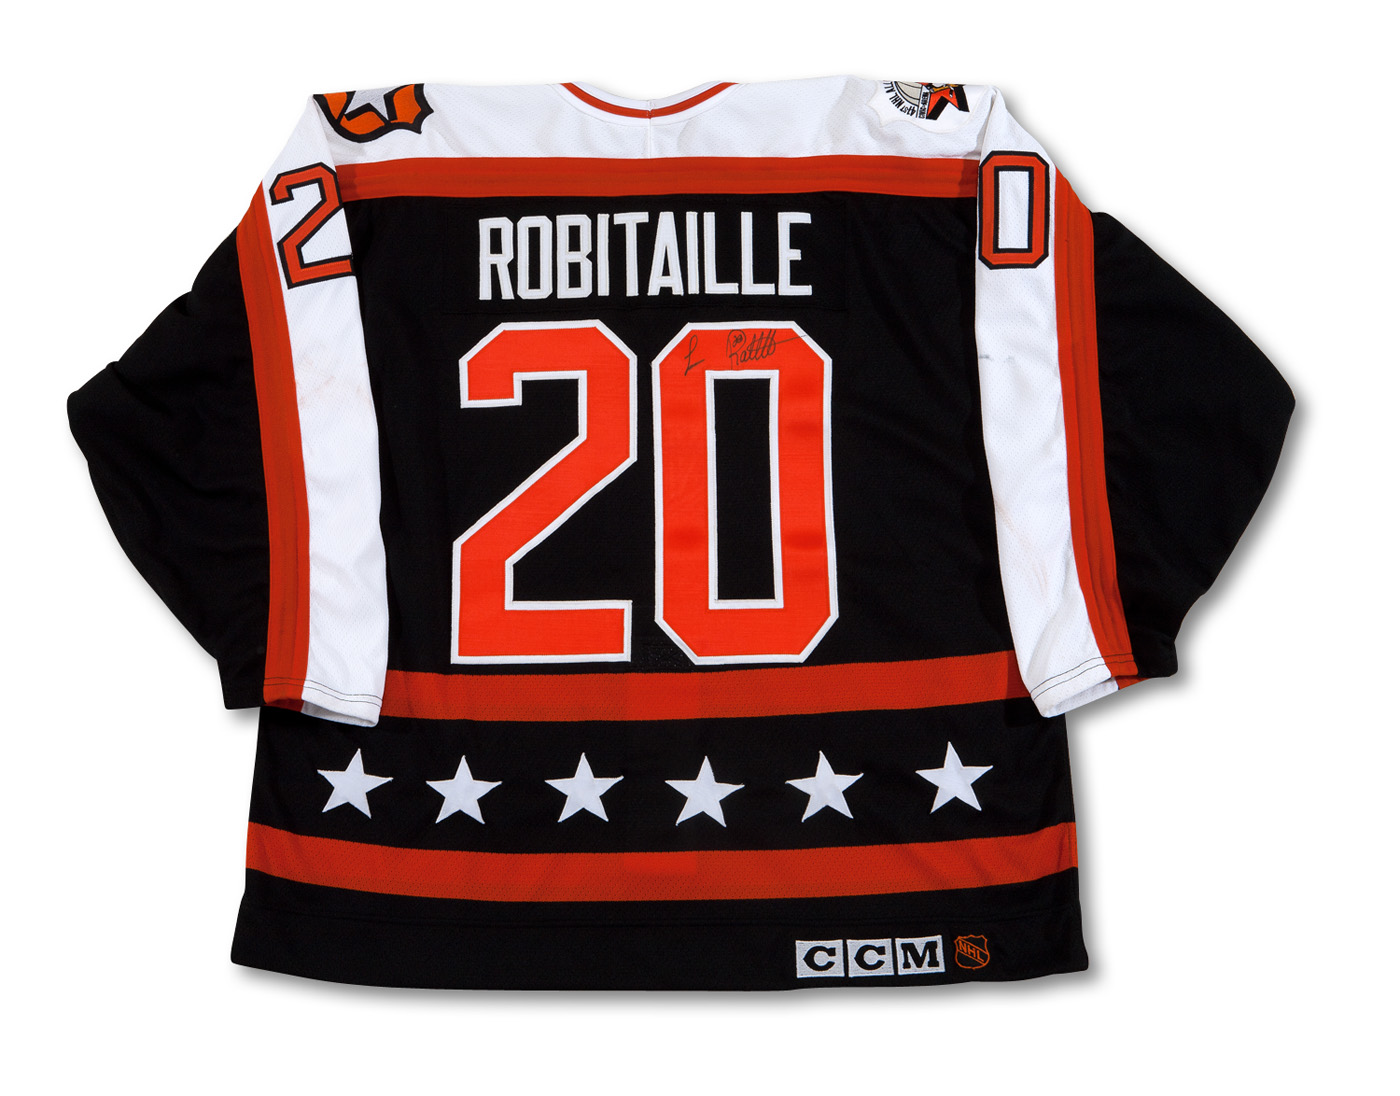 Luc Robitaille Autographed Jersey